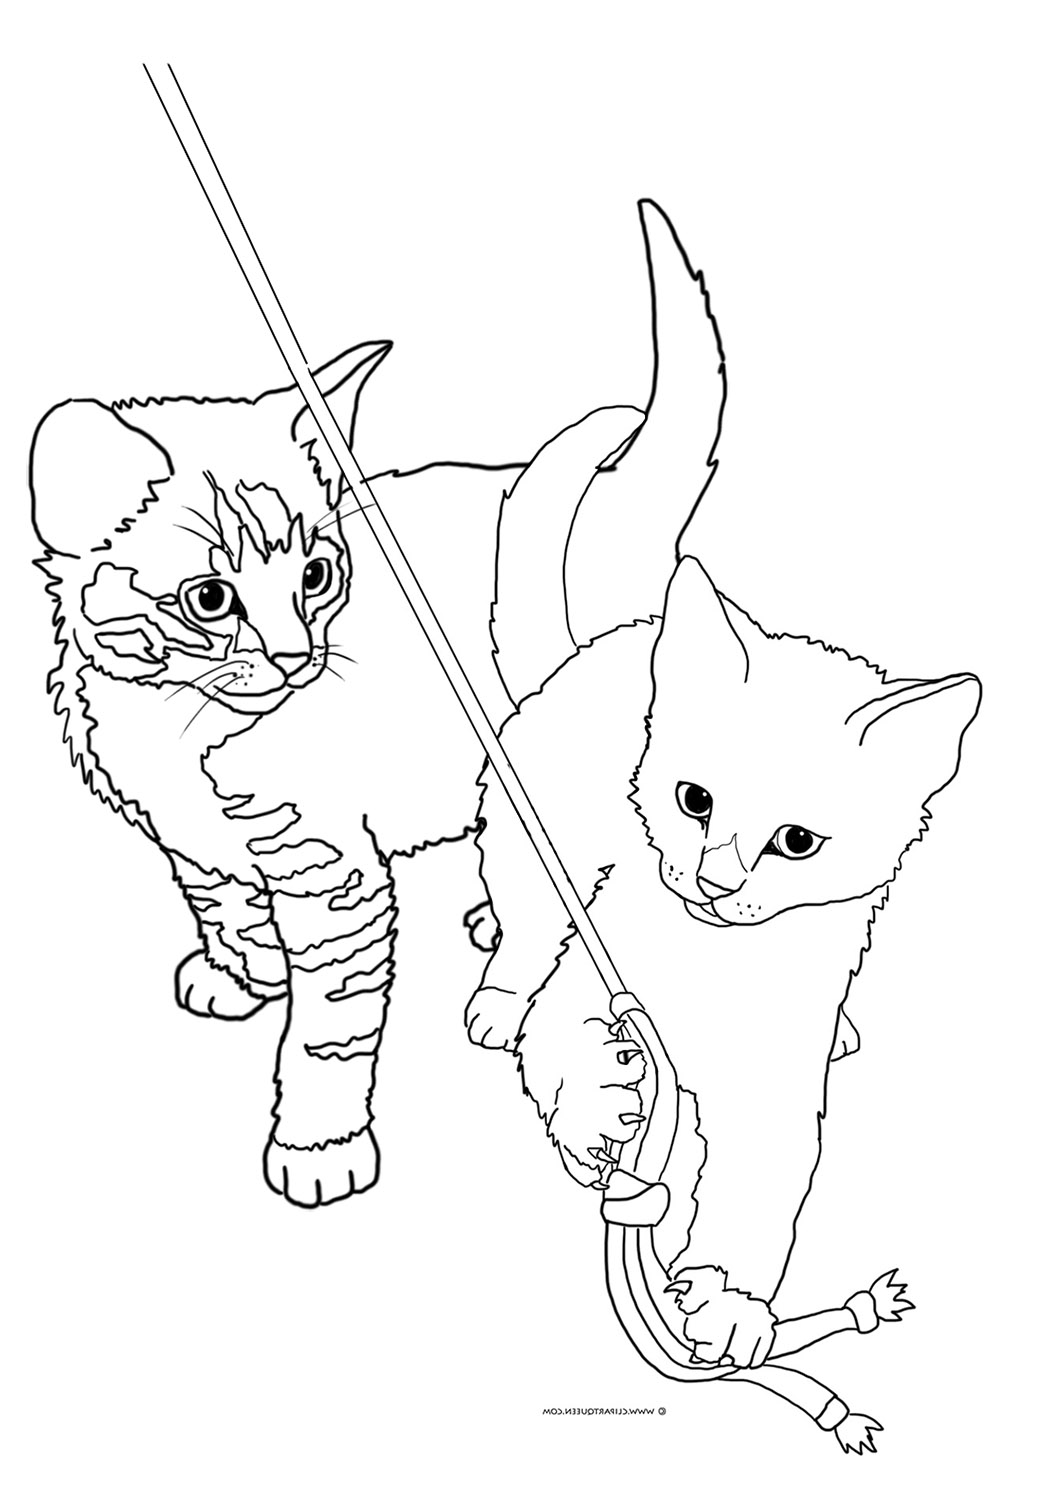 Realistic Kitten Cat Coloring Pages - Draw-nexus